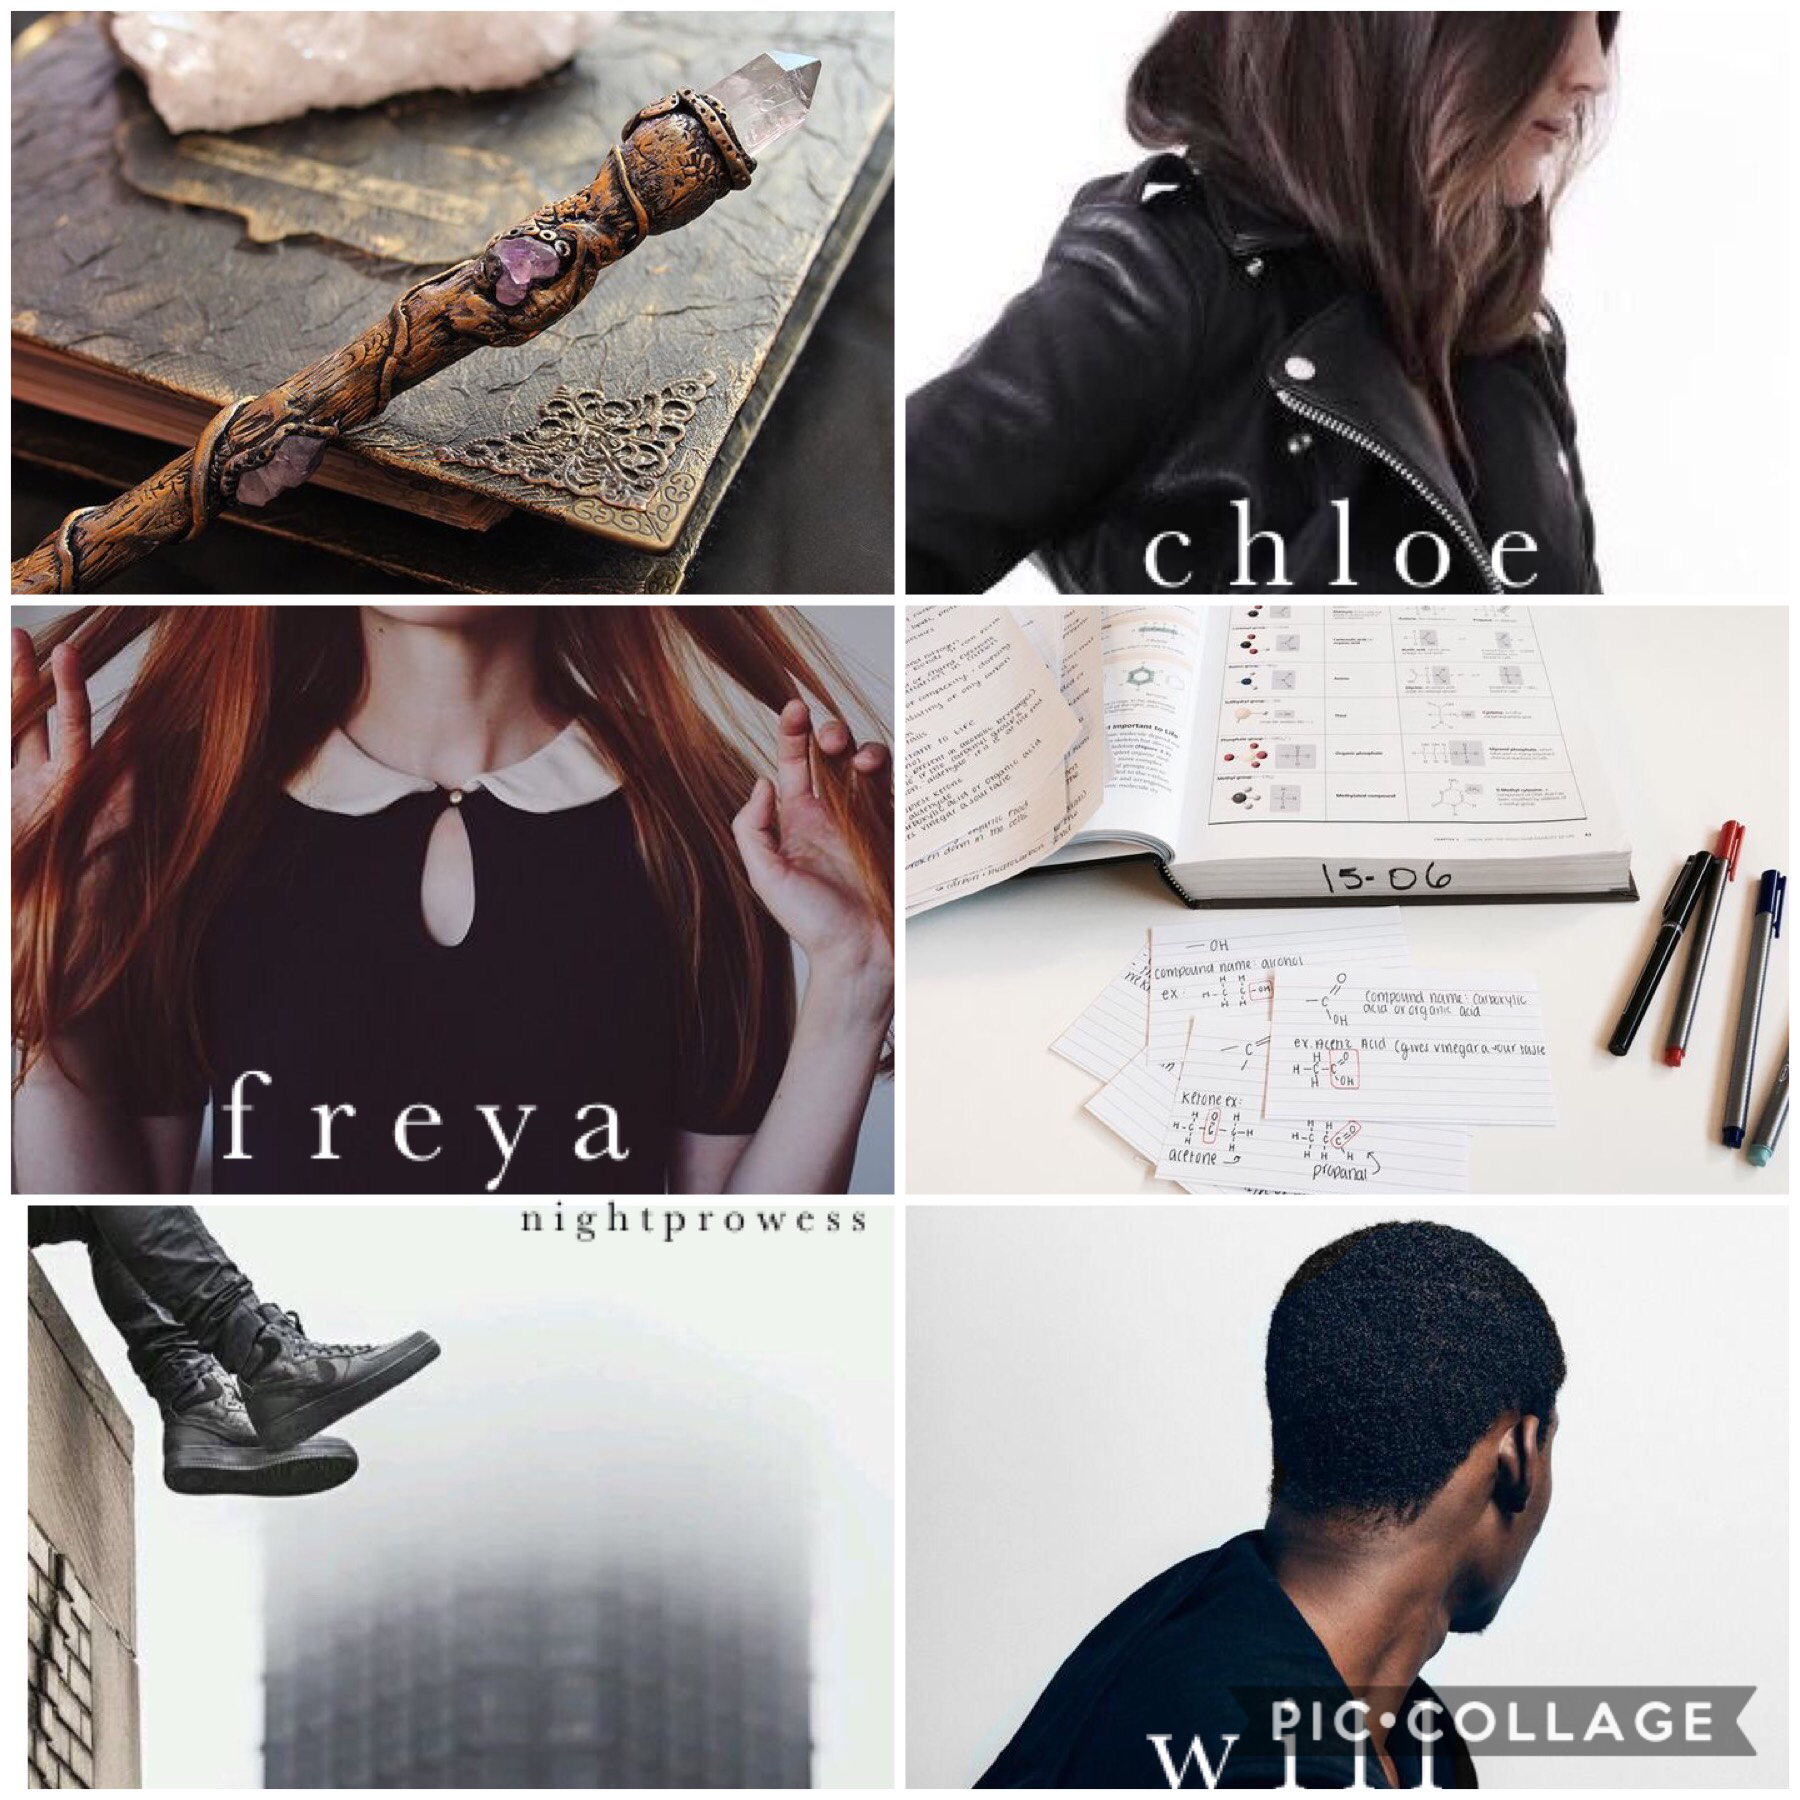 🖤t a p🖤
~Chloe Castell~Freya Hart~William Spencer~
This is probably the tenth time I’ve reposted this, but I might end up deleting anyways. Tell me what character you want to here more about! This is an aesthetic for my book.